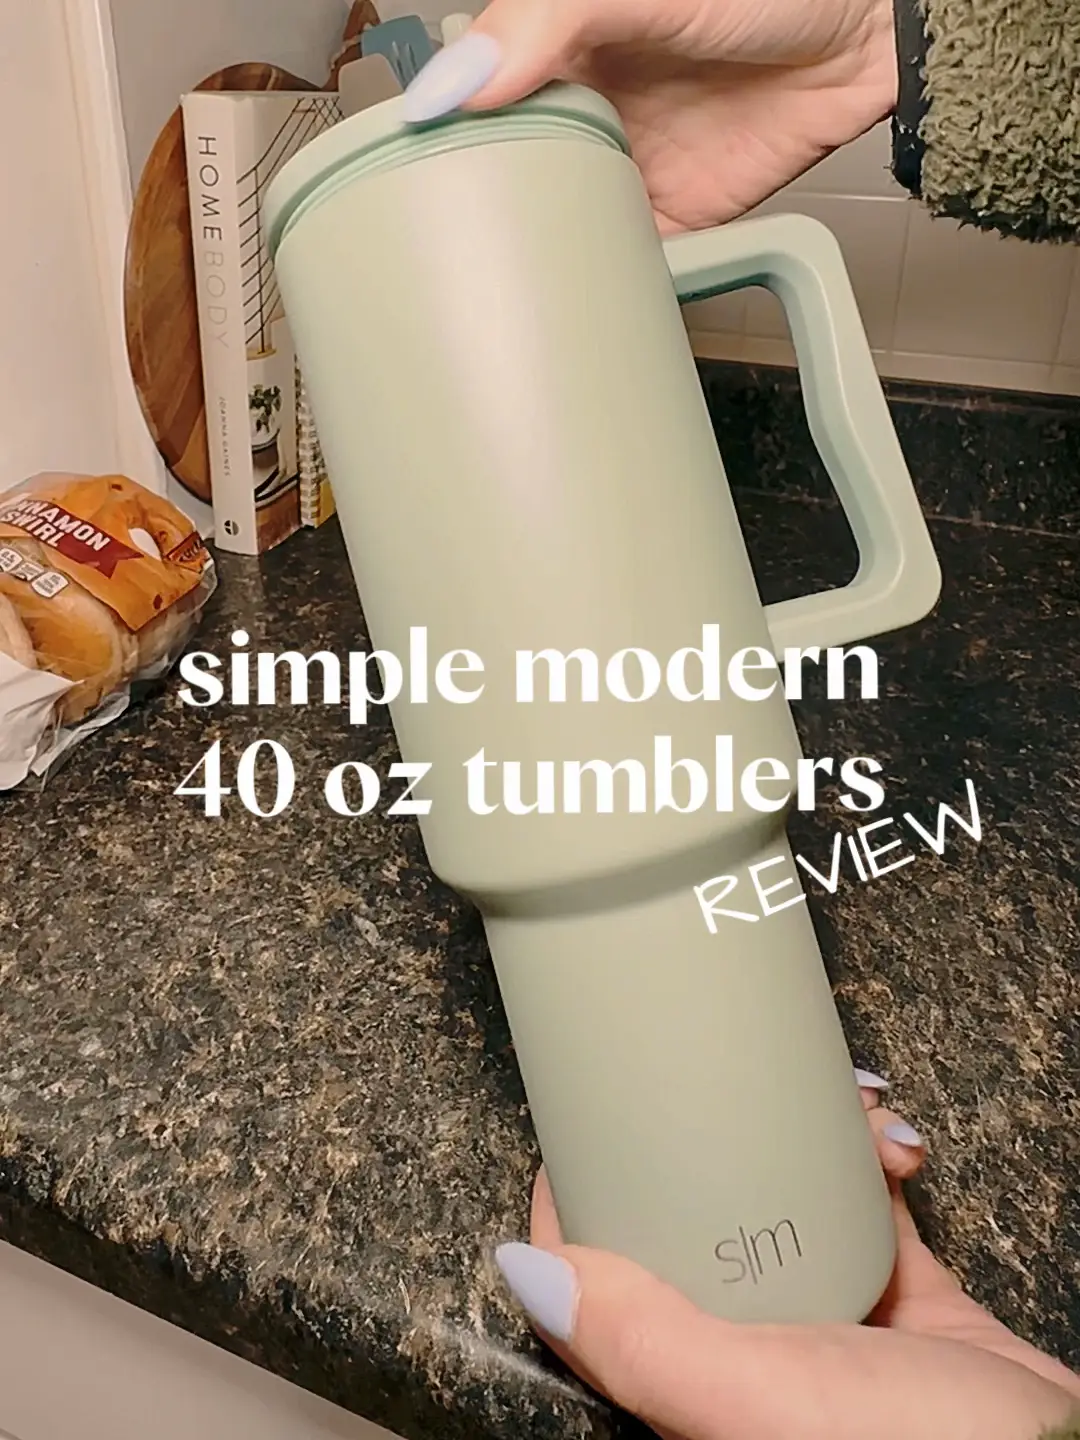 simple modern 40 oz tumblr, review, Video published by ABBY ALEXIS